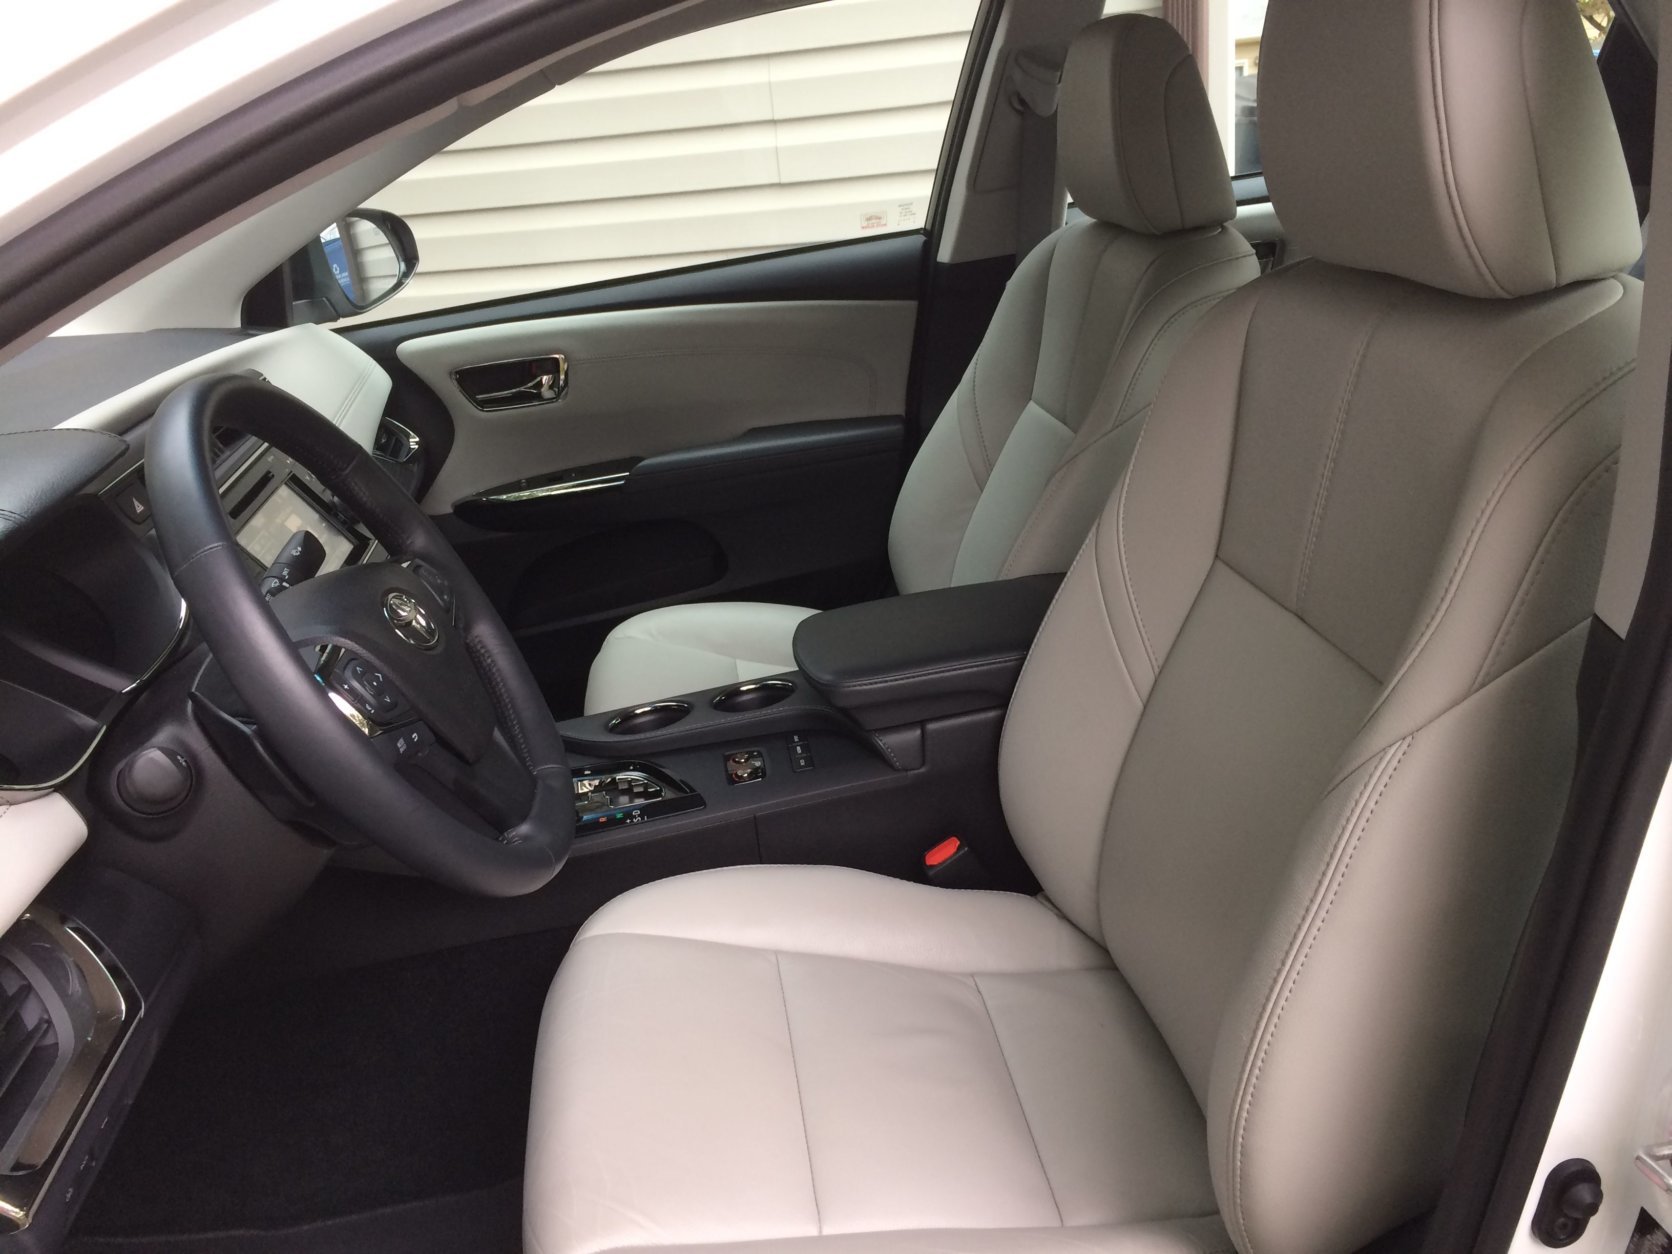 Parris says the interior has comfortable front heated seats in high quality leather, with a nice amount of power controls to find a good seating position. (WTOP/Mike Parris)